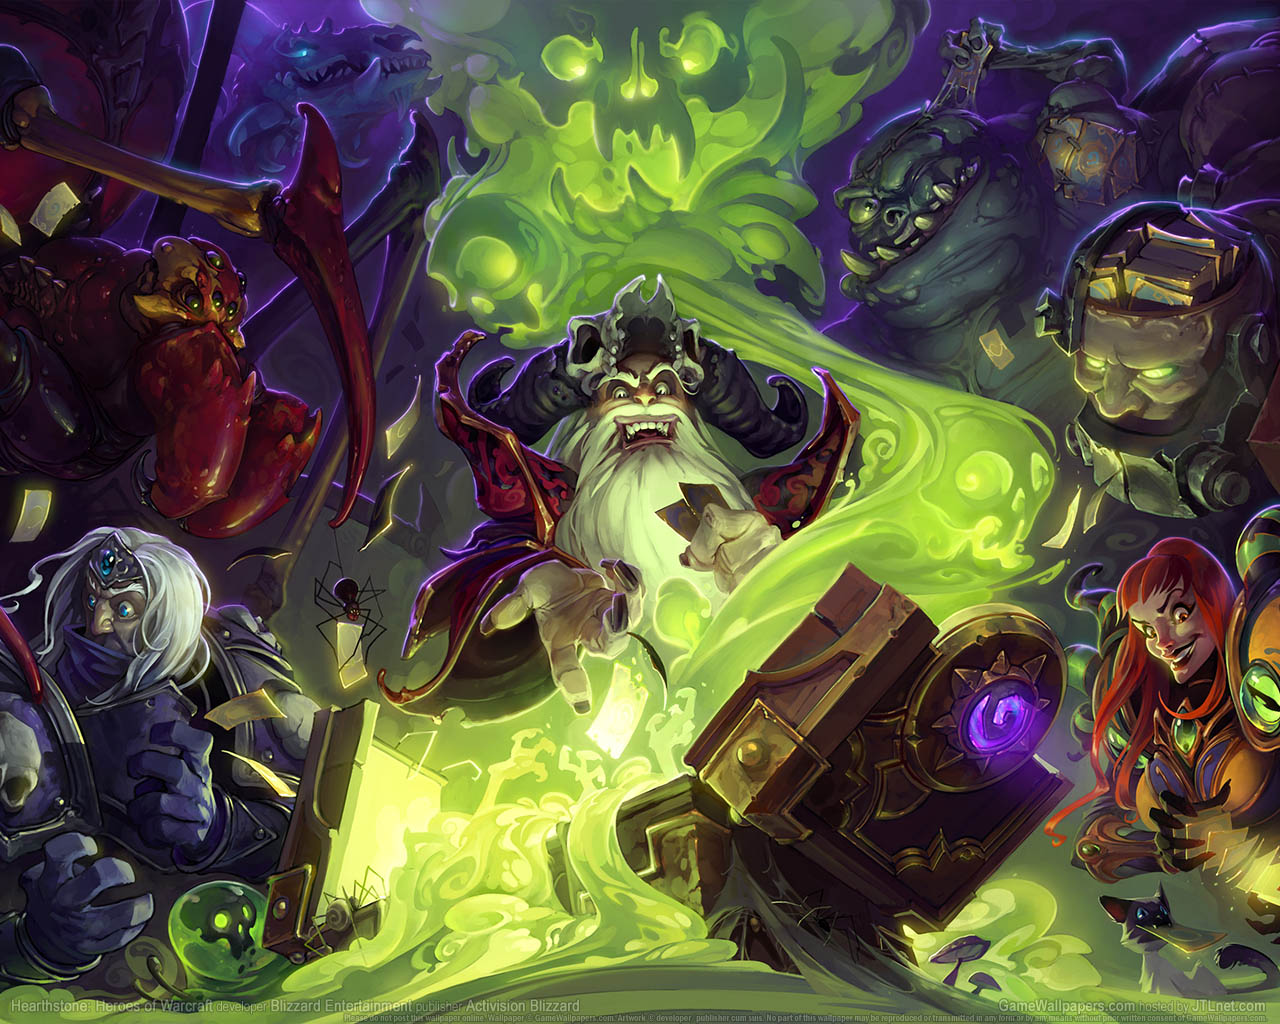 Hearthstone%253A Heroes of Warcraft wallpaper 08 1280x1024